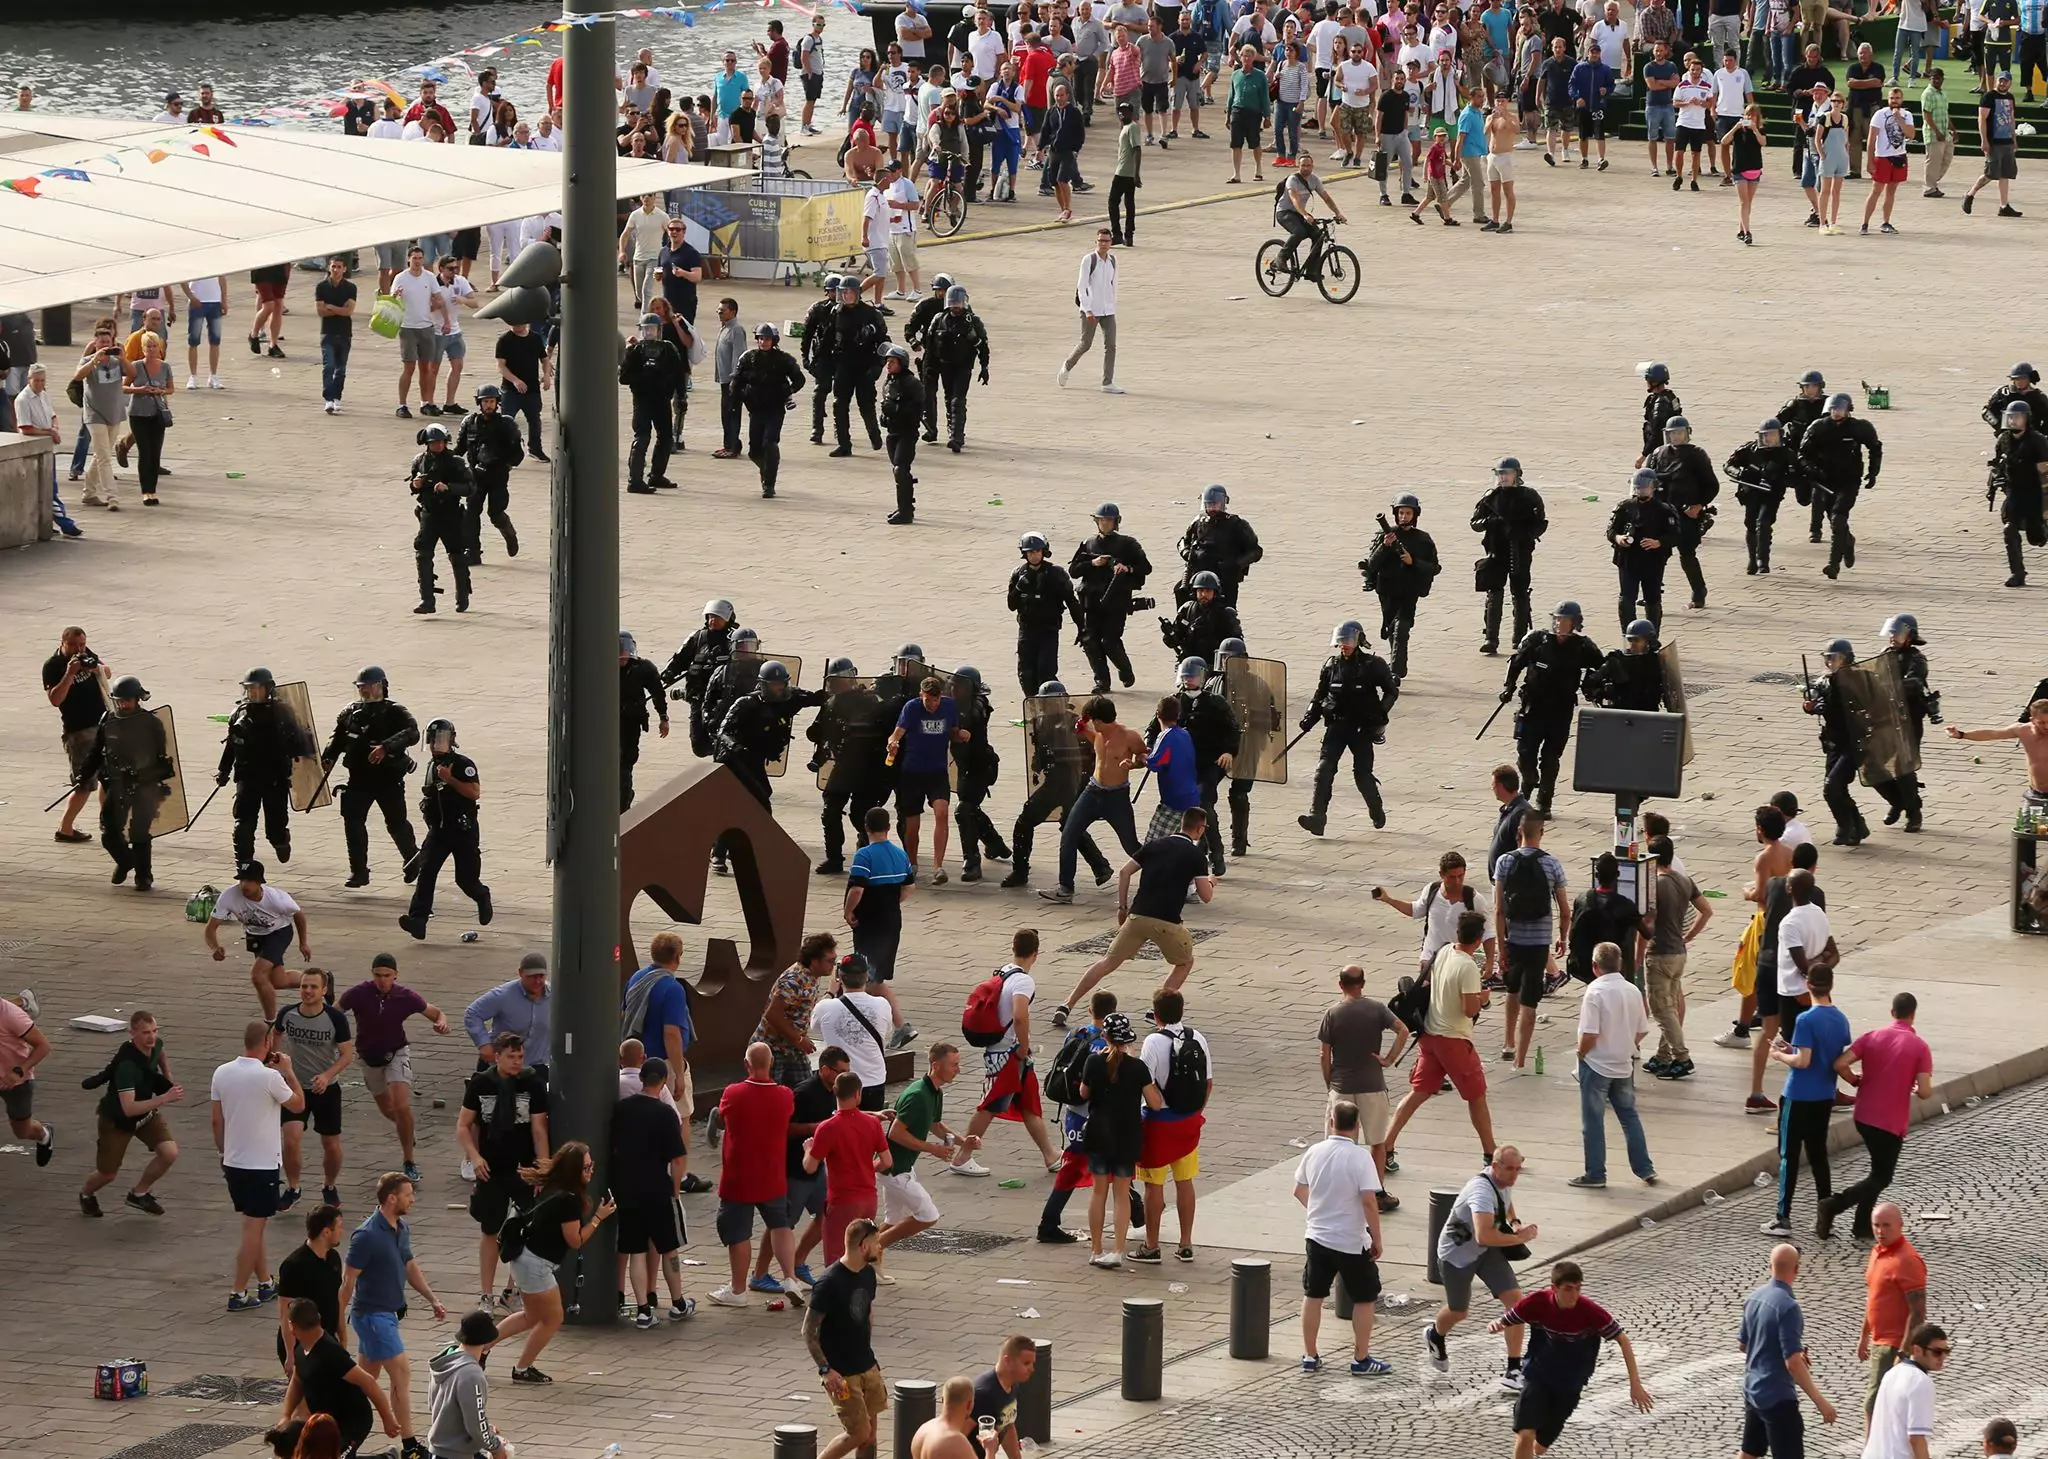 England and Russia fans clash with police at Euro 2016. Image: PA Images